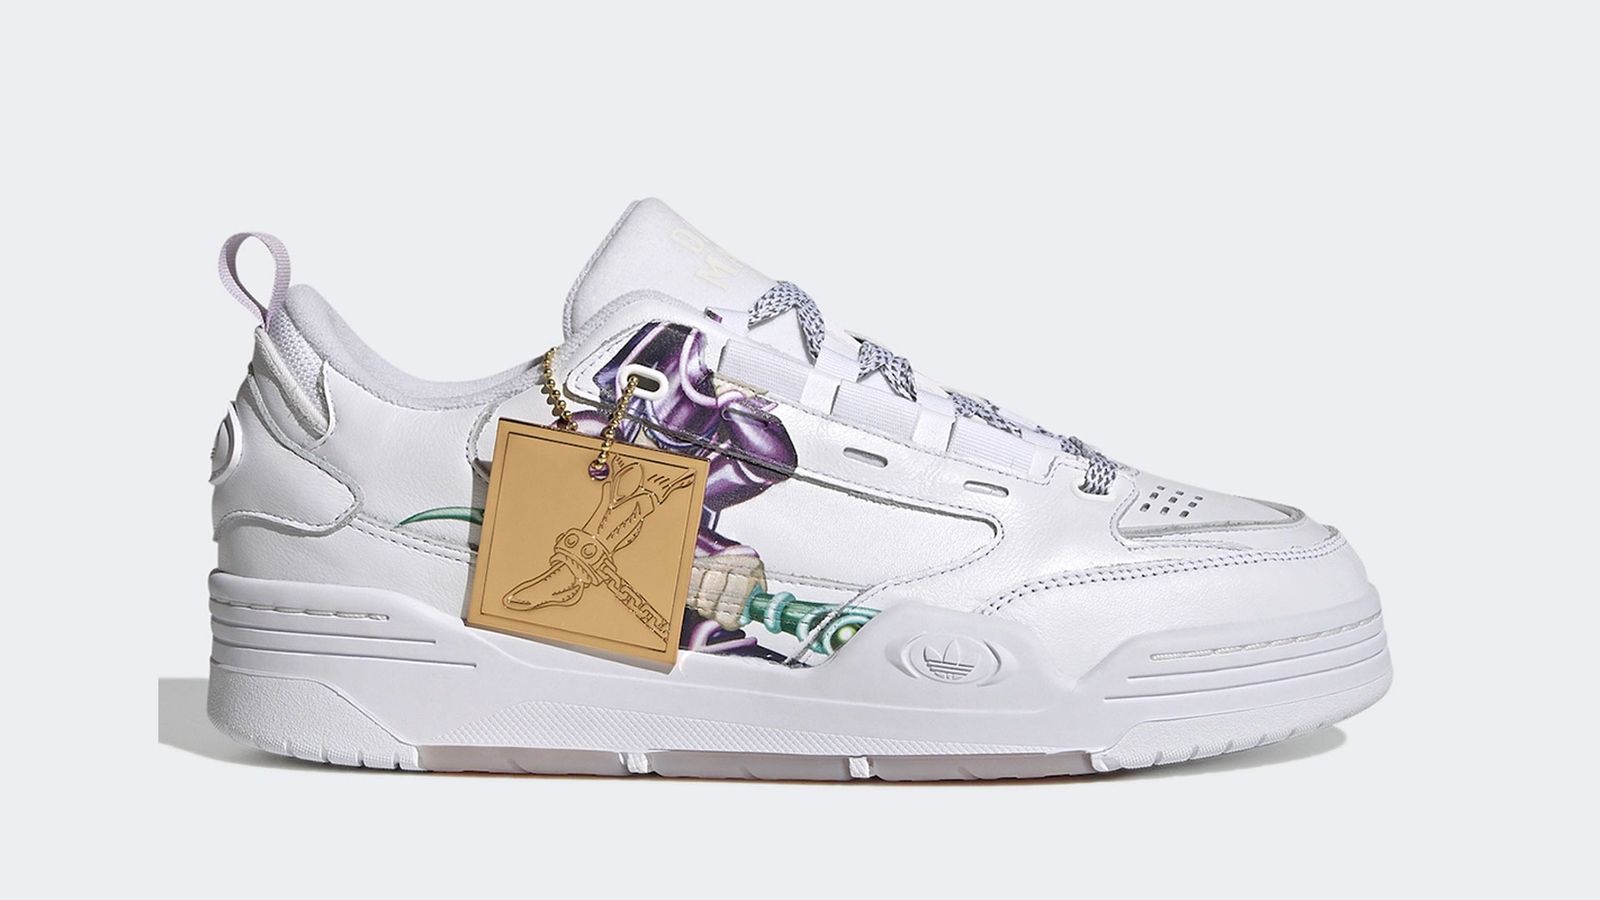 Yu-Gi-Oh! x adidas ADI2000 product image of a white sneaker with a graphic of Dark Magician on the side and a golden hang tag.